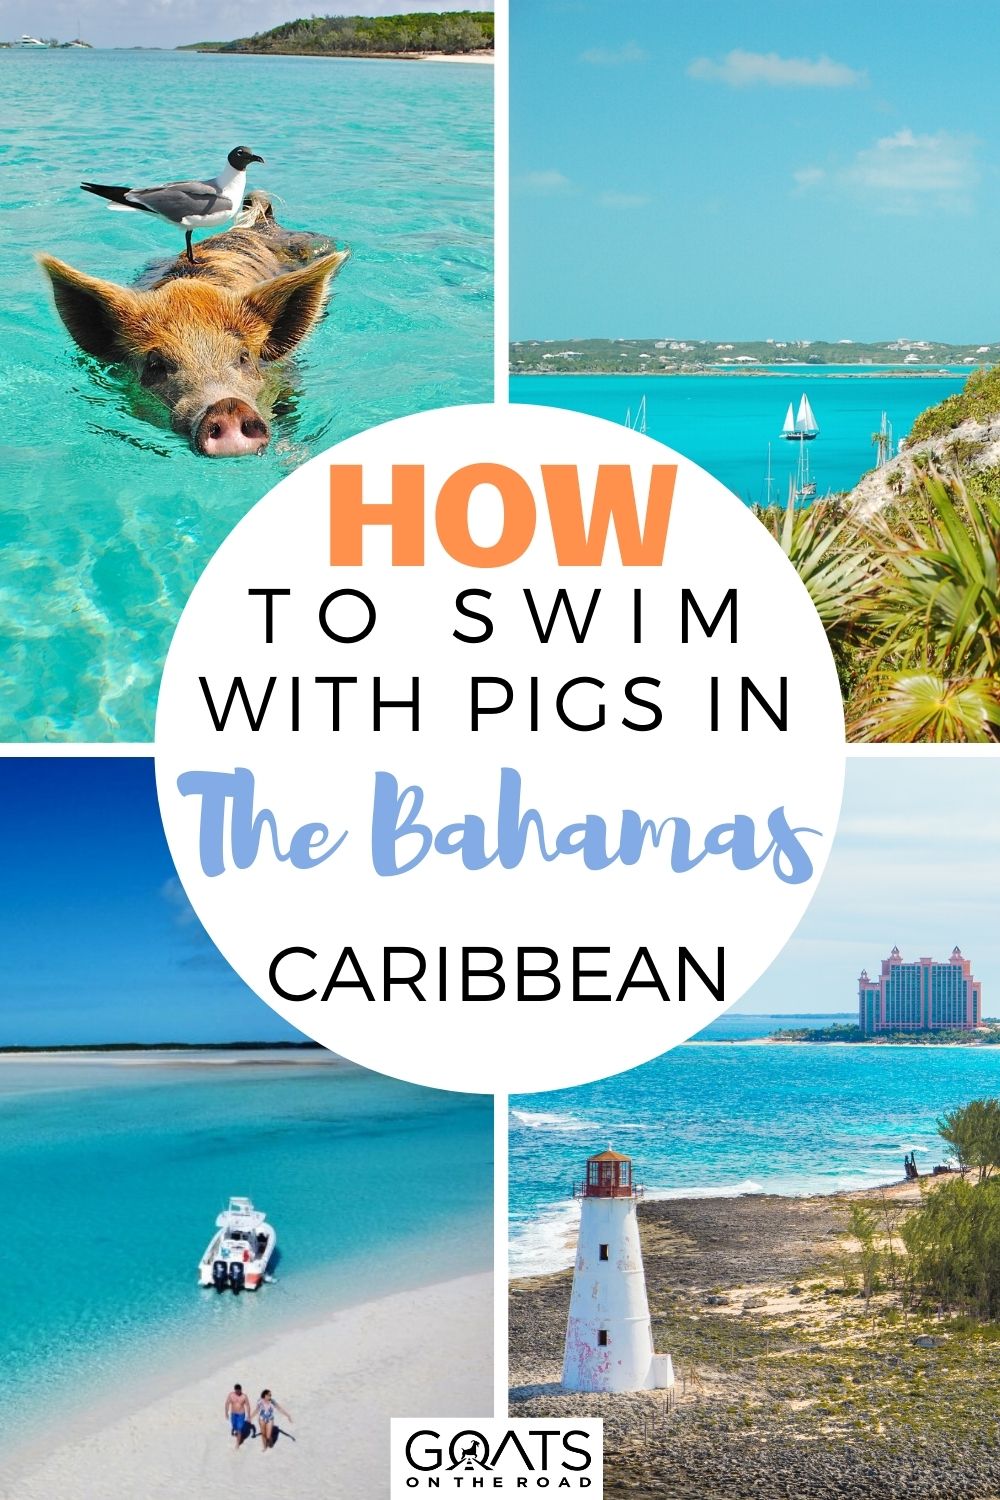 How to Swim with Pigs in The Bahamas